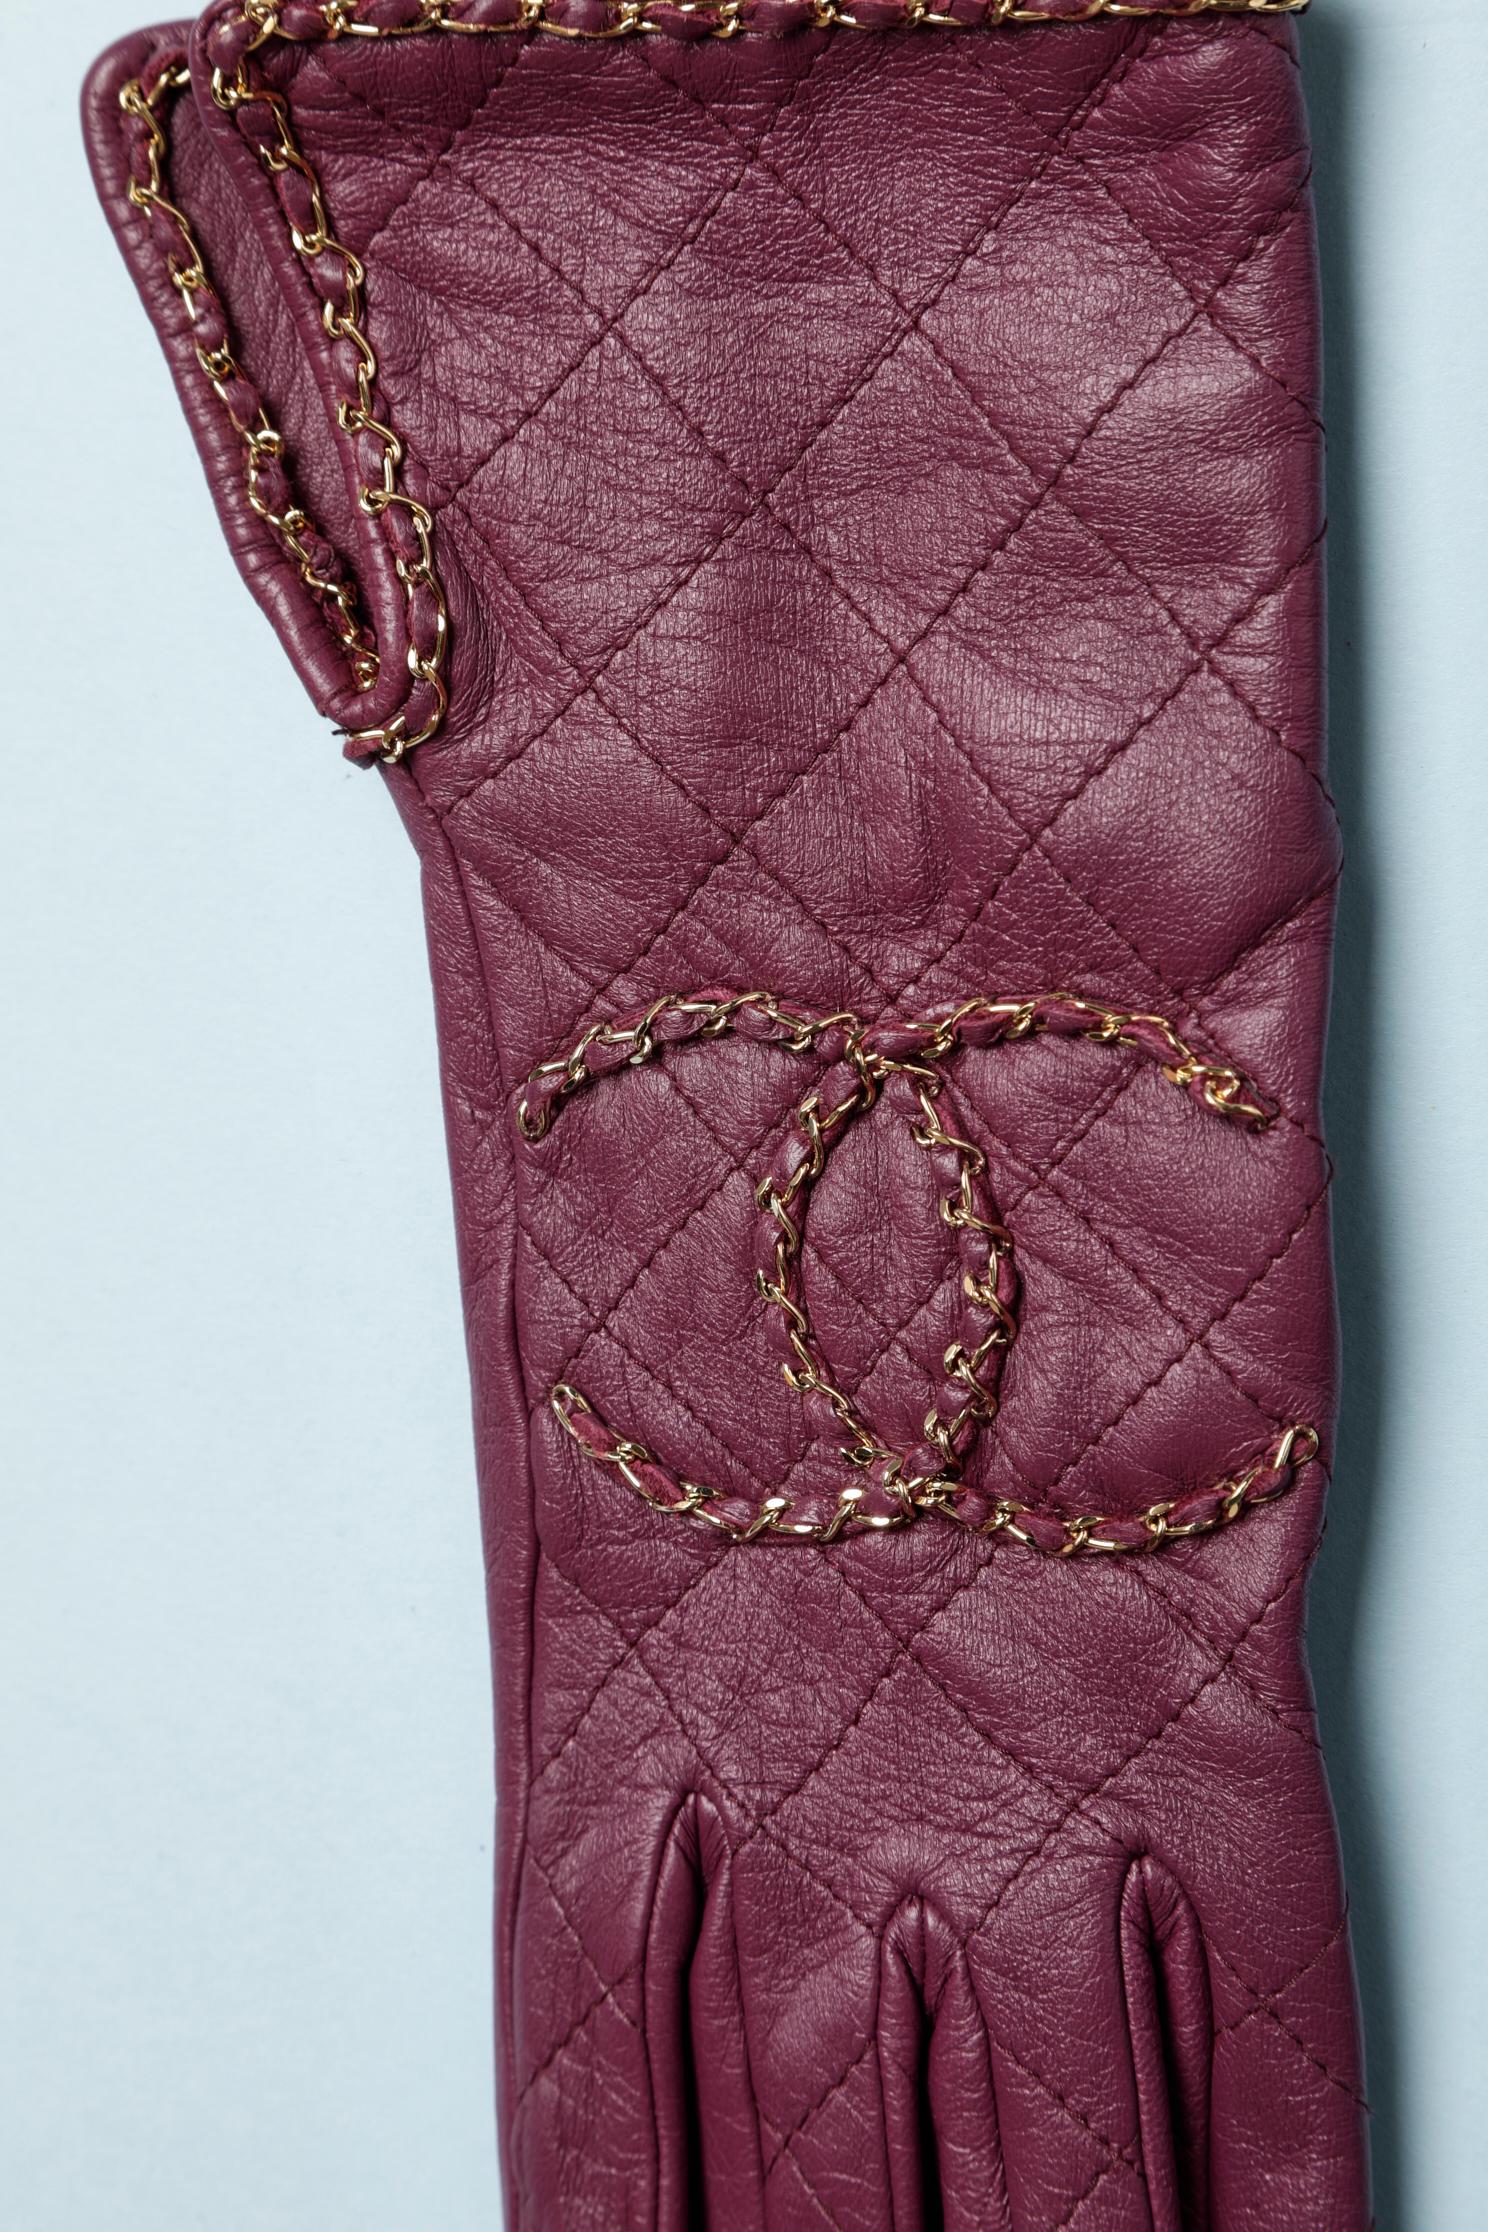 Burgundy leather gloves with chains and top-stitched